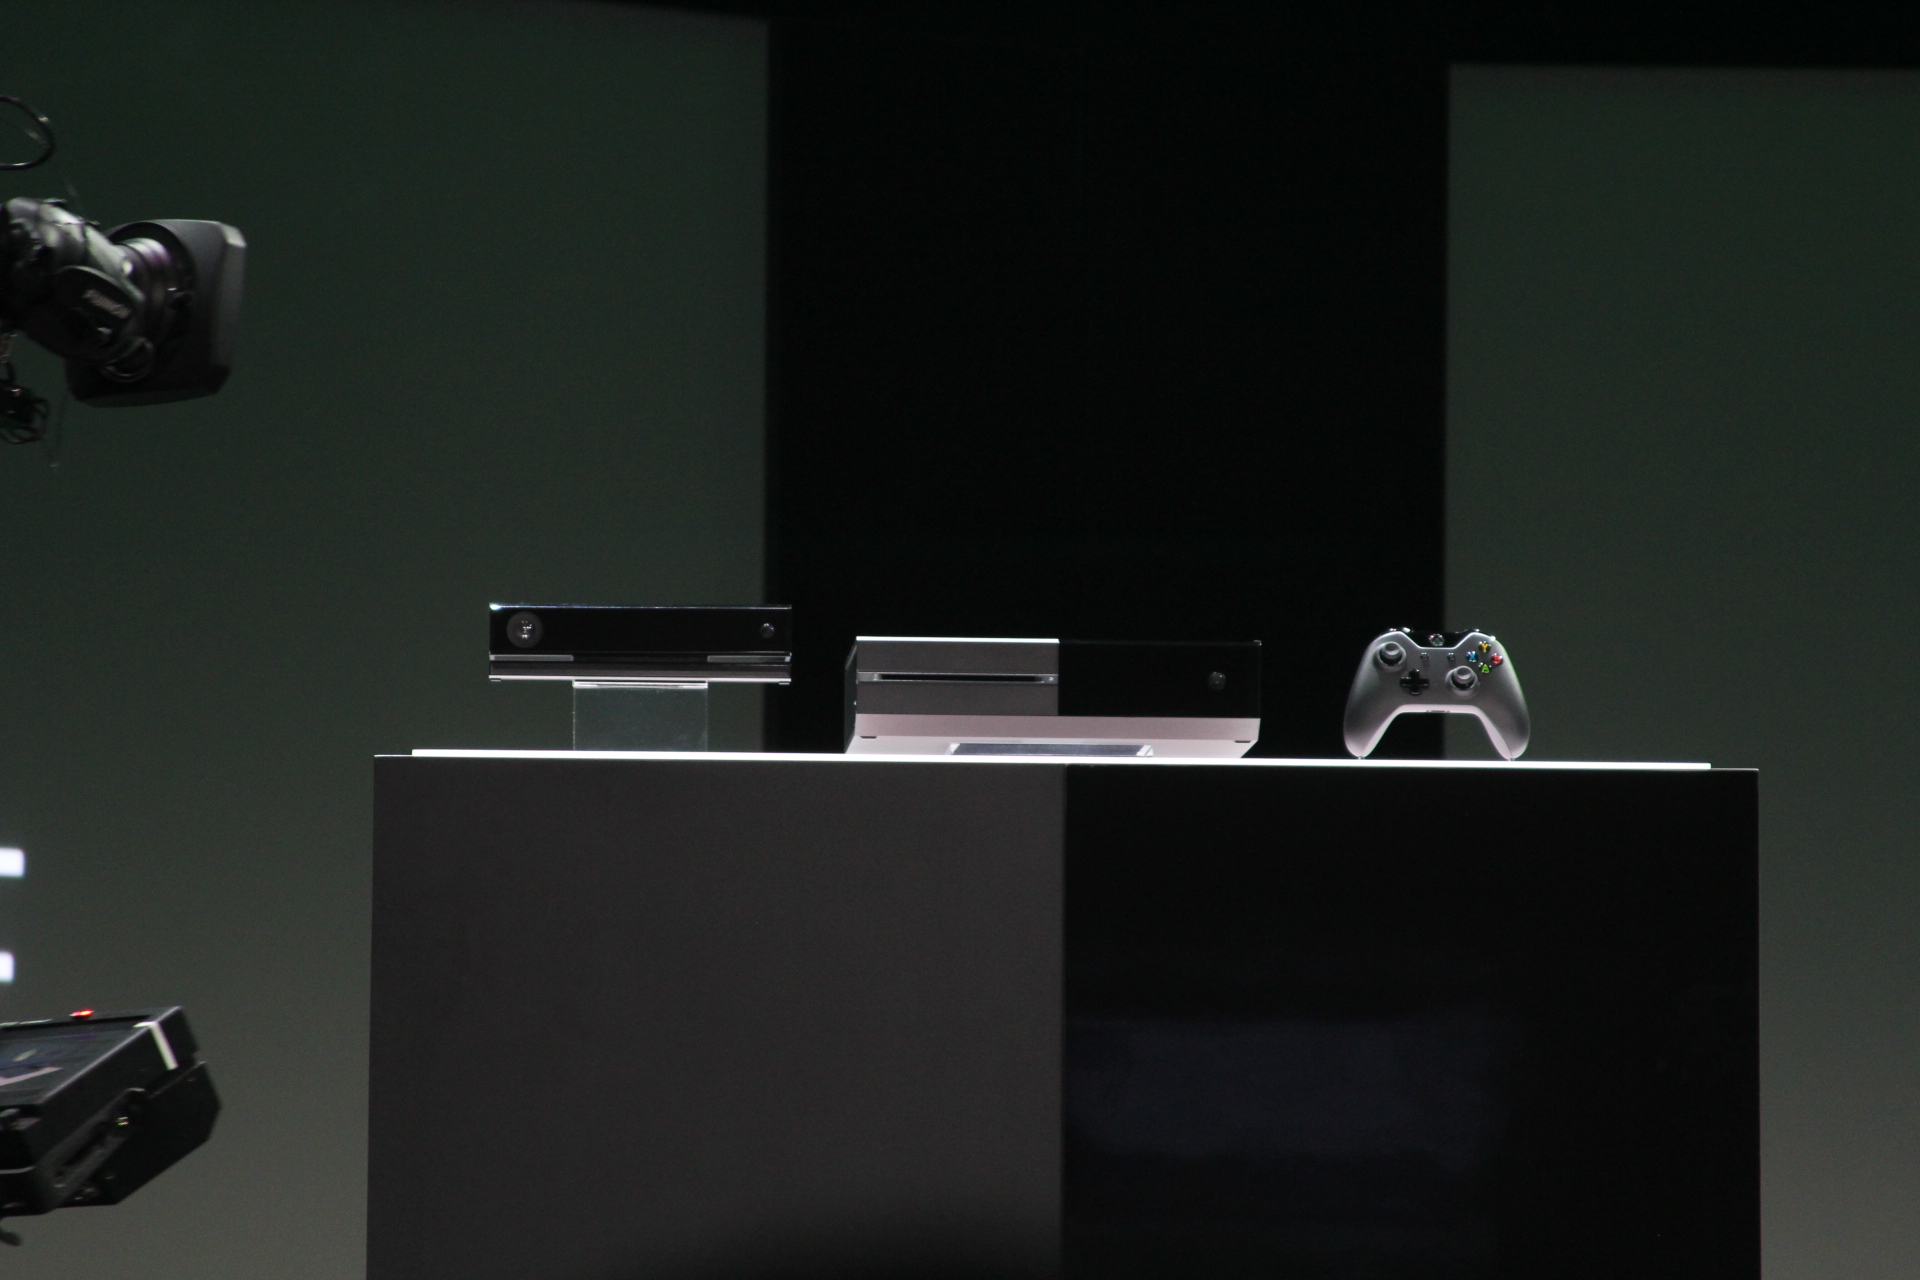 introduces Xbox One with 8GB RAM, USB 3.0, WiFi coming 'later this year'